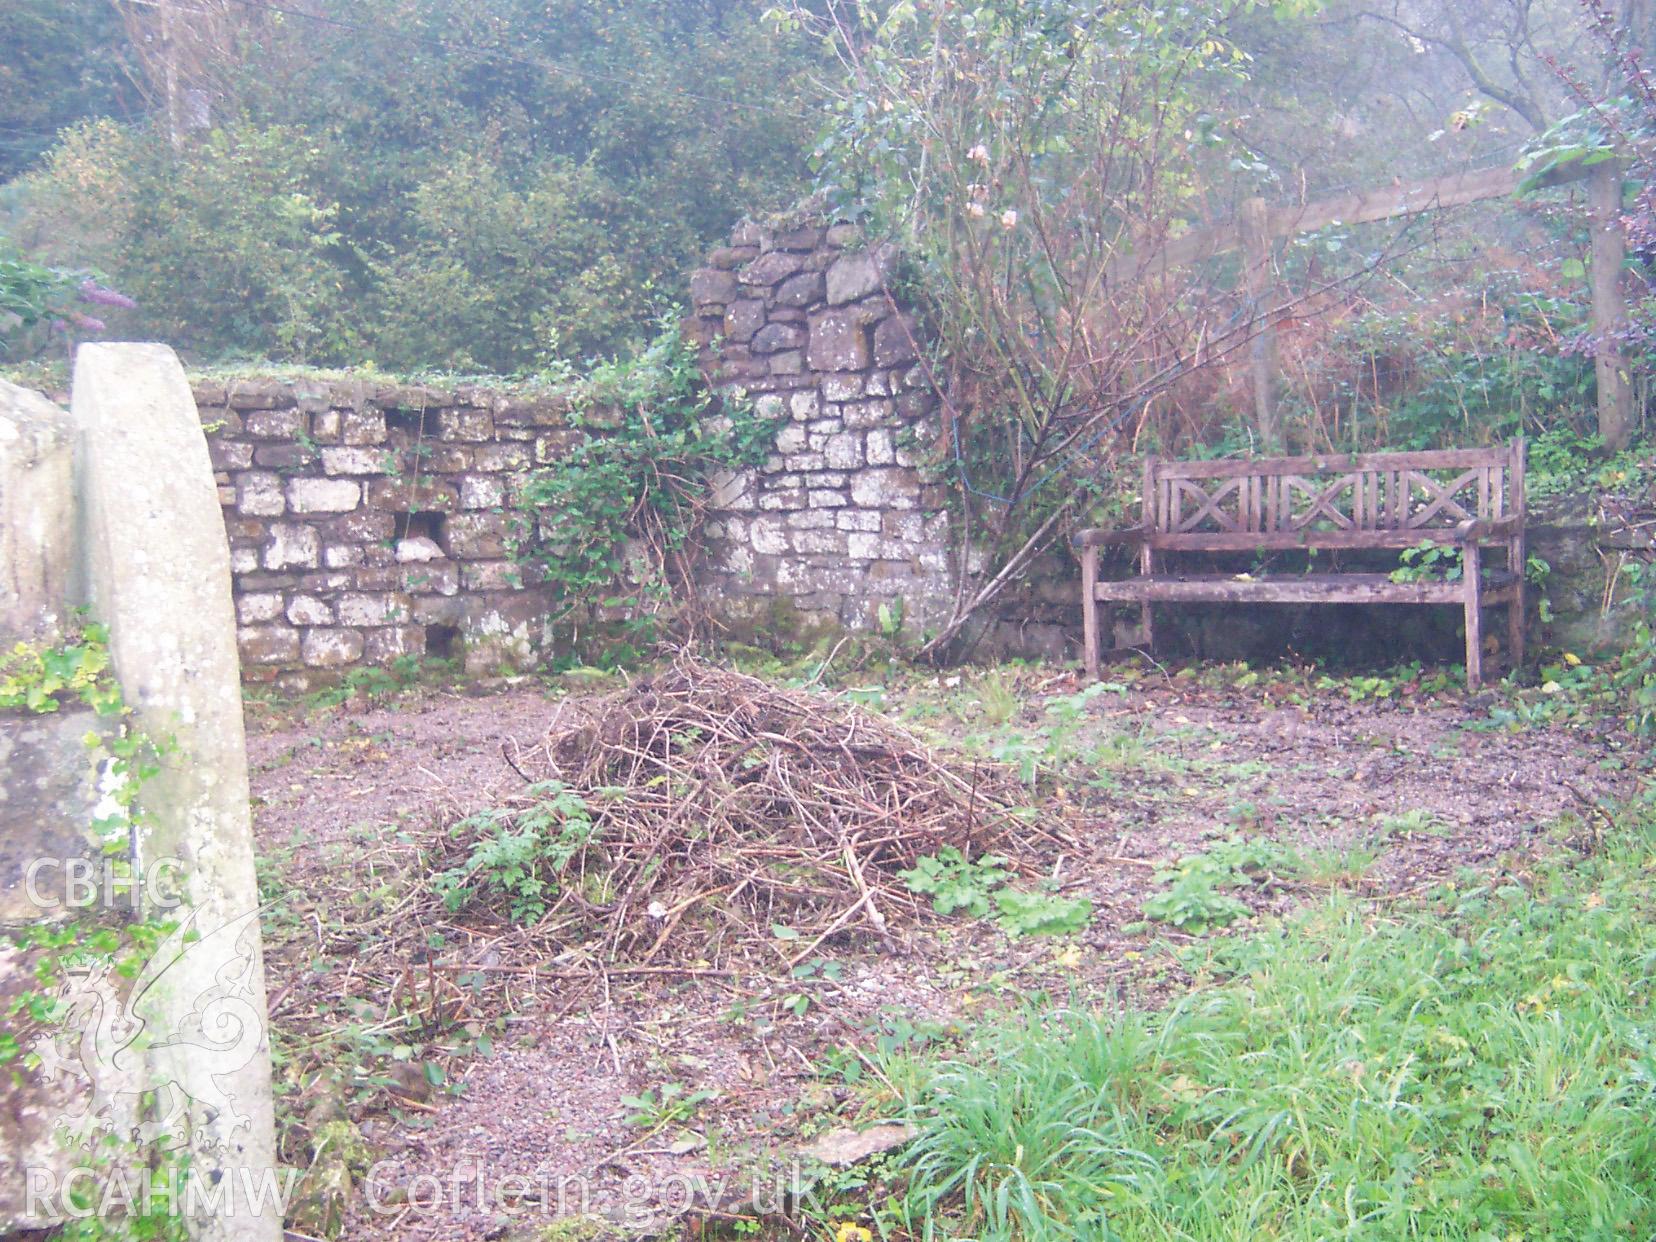 Colour digital photograph showing the site of the former school toilets.